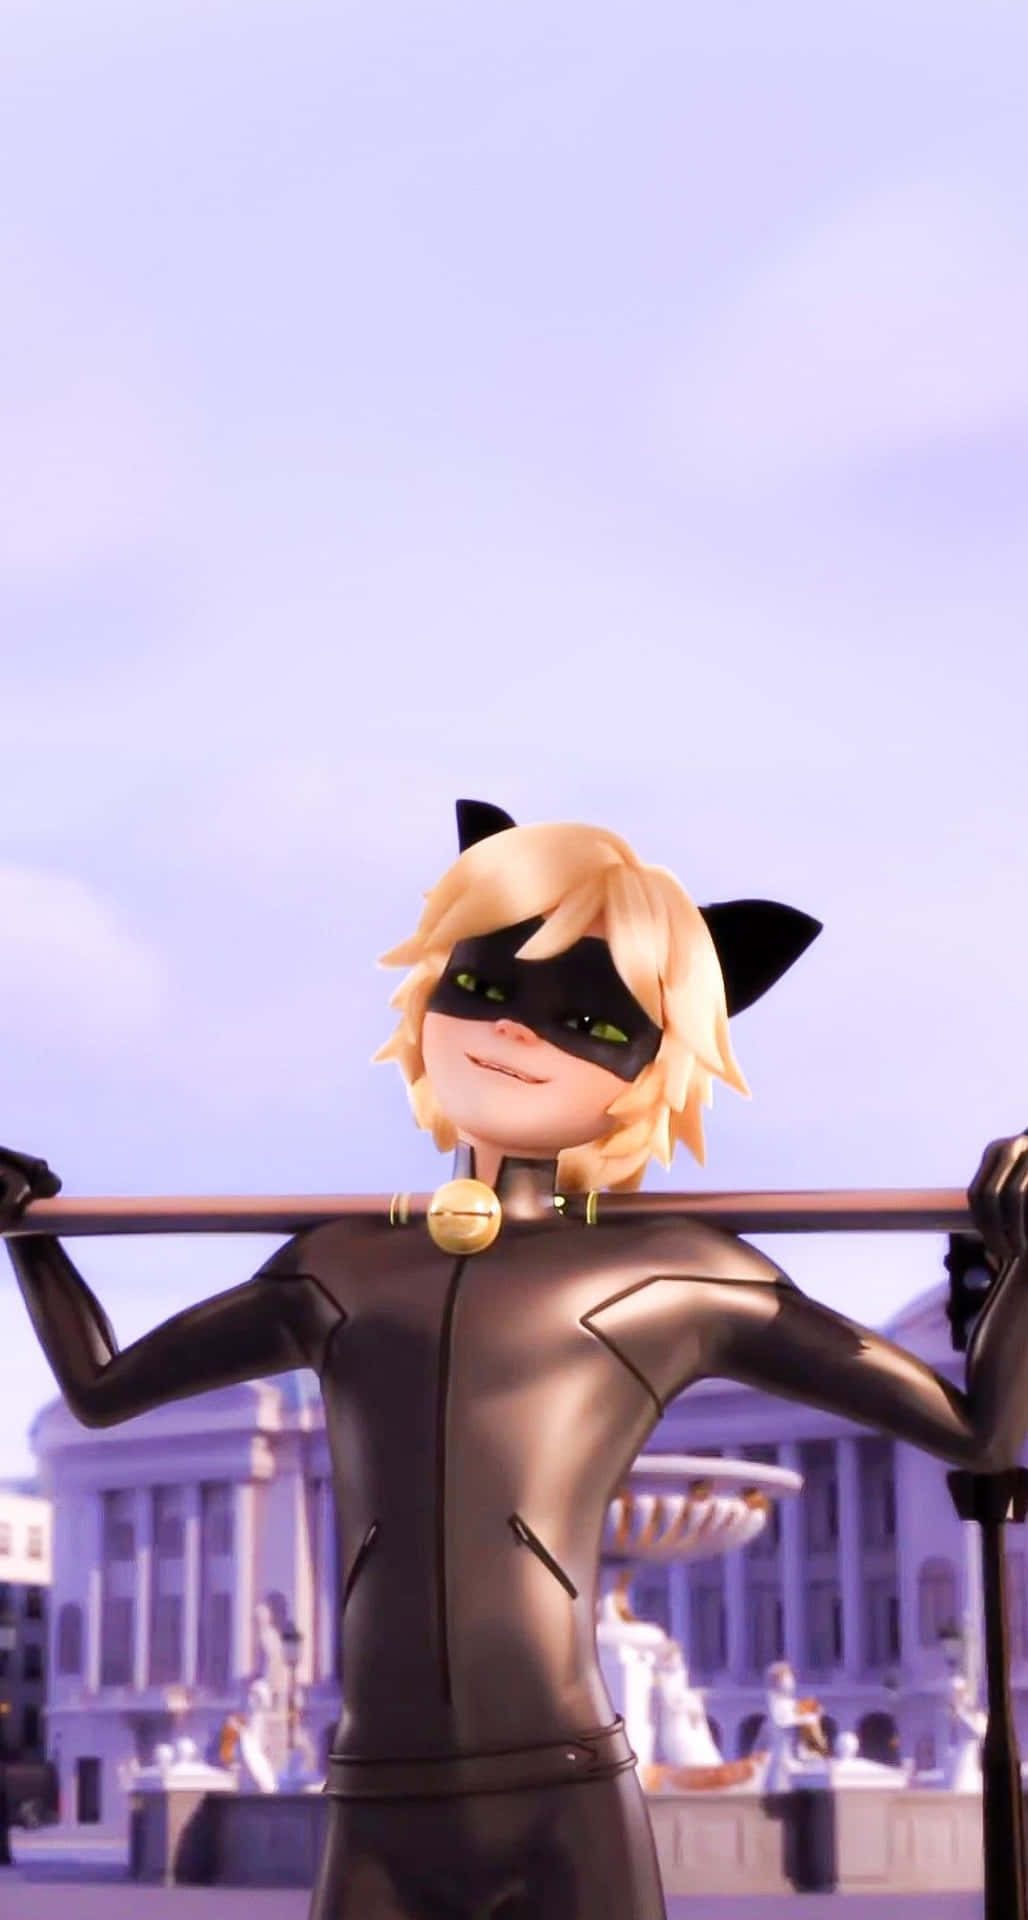 Miraculous: Tales Of Ladybug And Chat Noir